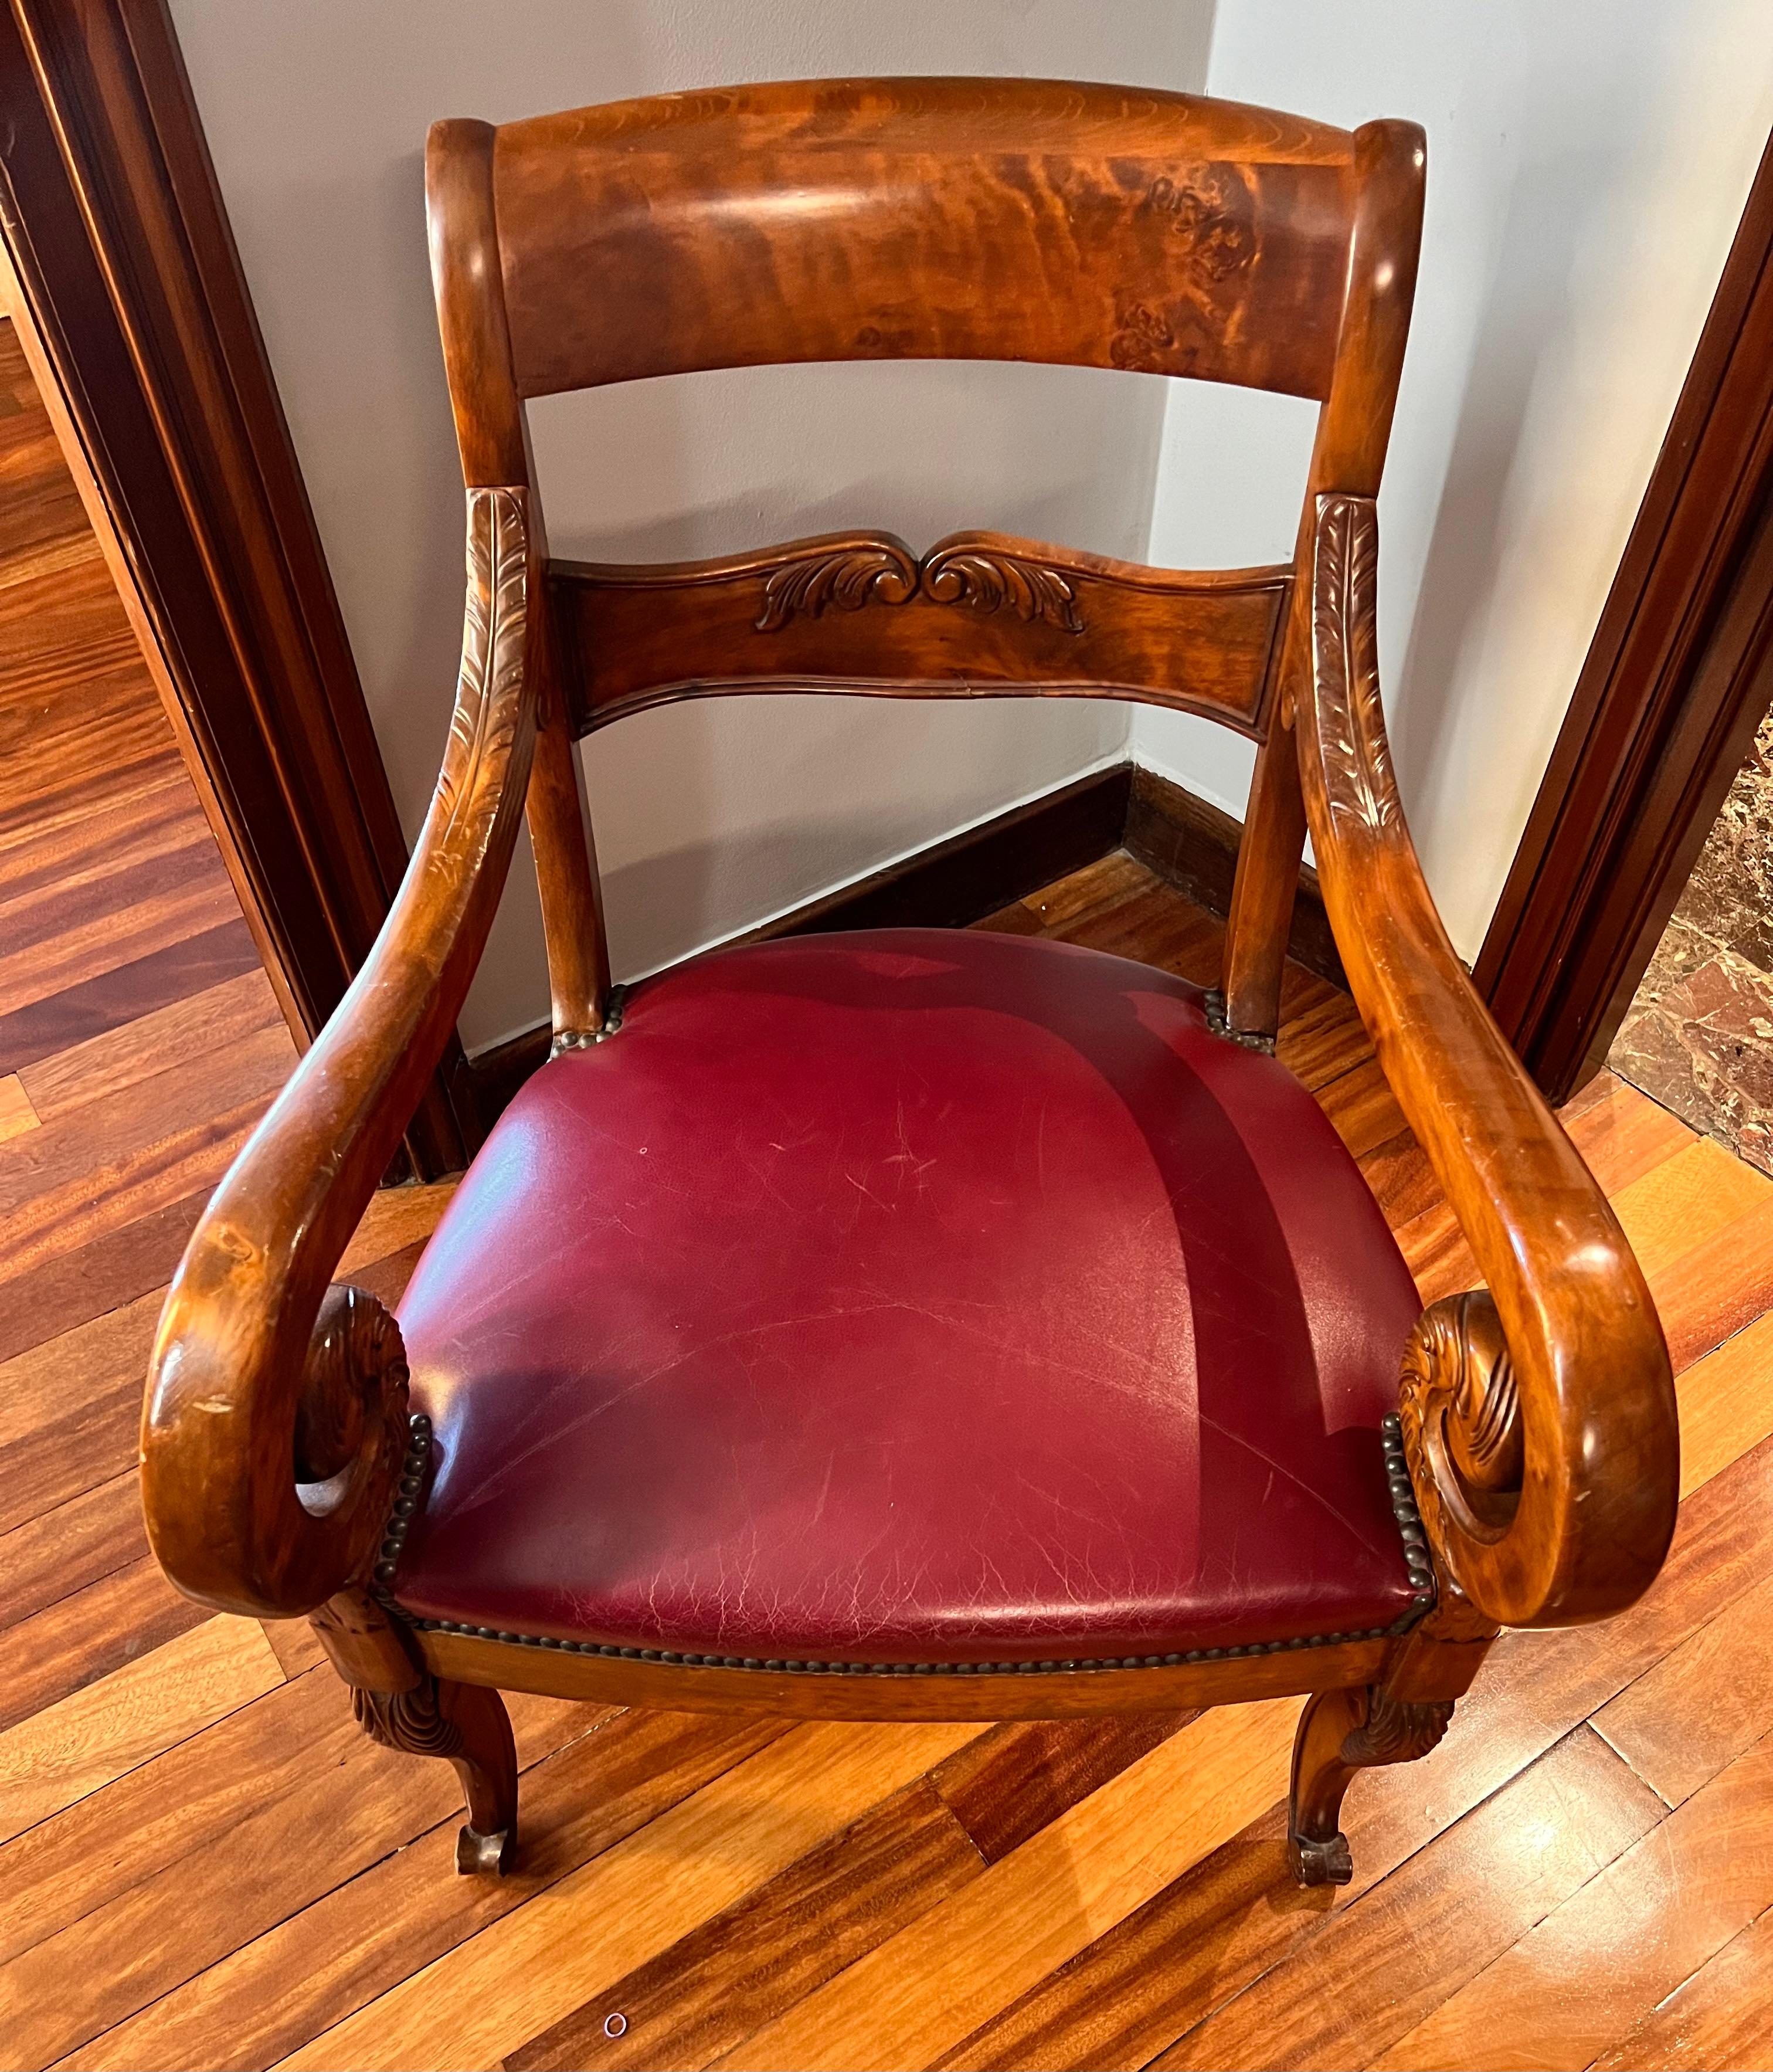 Walnut arm chair bierdemeir style with in bordeaux leather upholstery. 
Dimensions chair 
Height: 86cm seat 33.85cm.
Width: 22.83 in. (58cm). 
Depth: 19.29 in. (49cm). 

PRADERA is a second generation of a family run business jewelers of reference